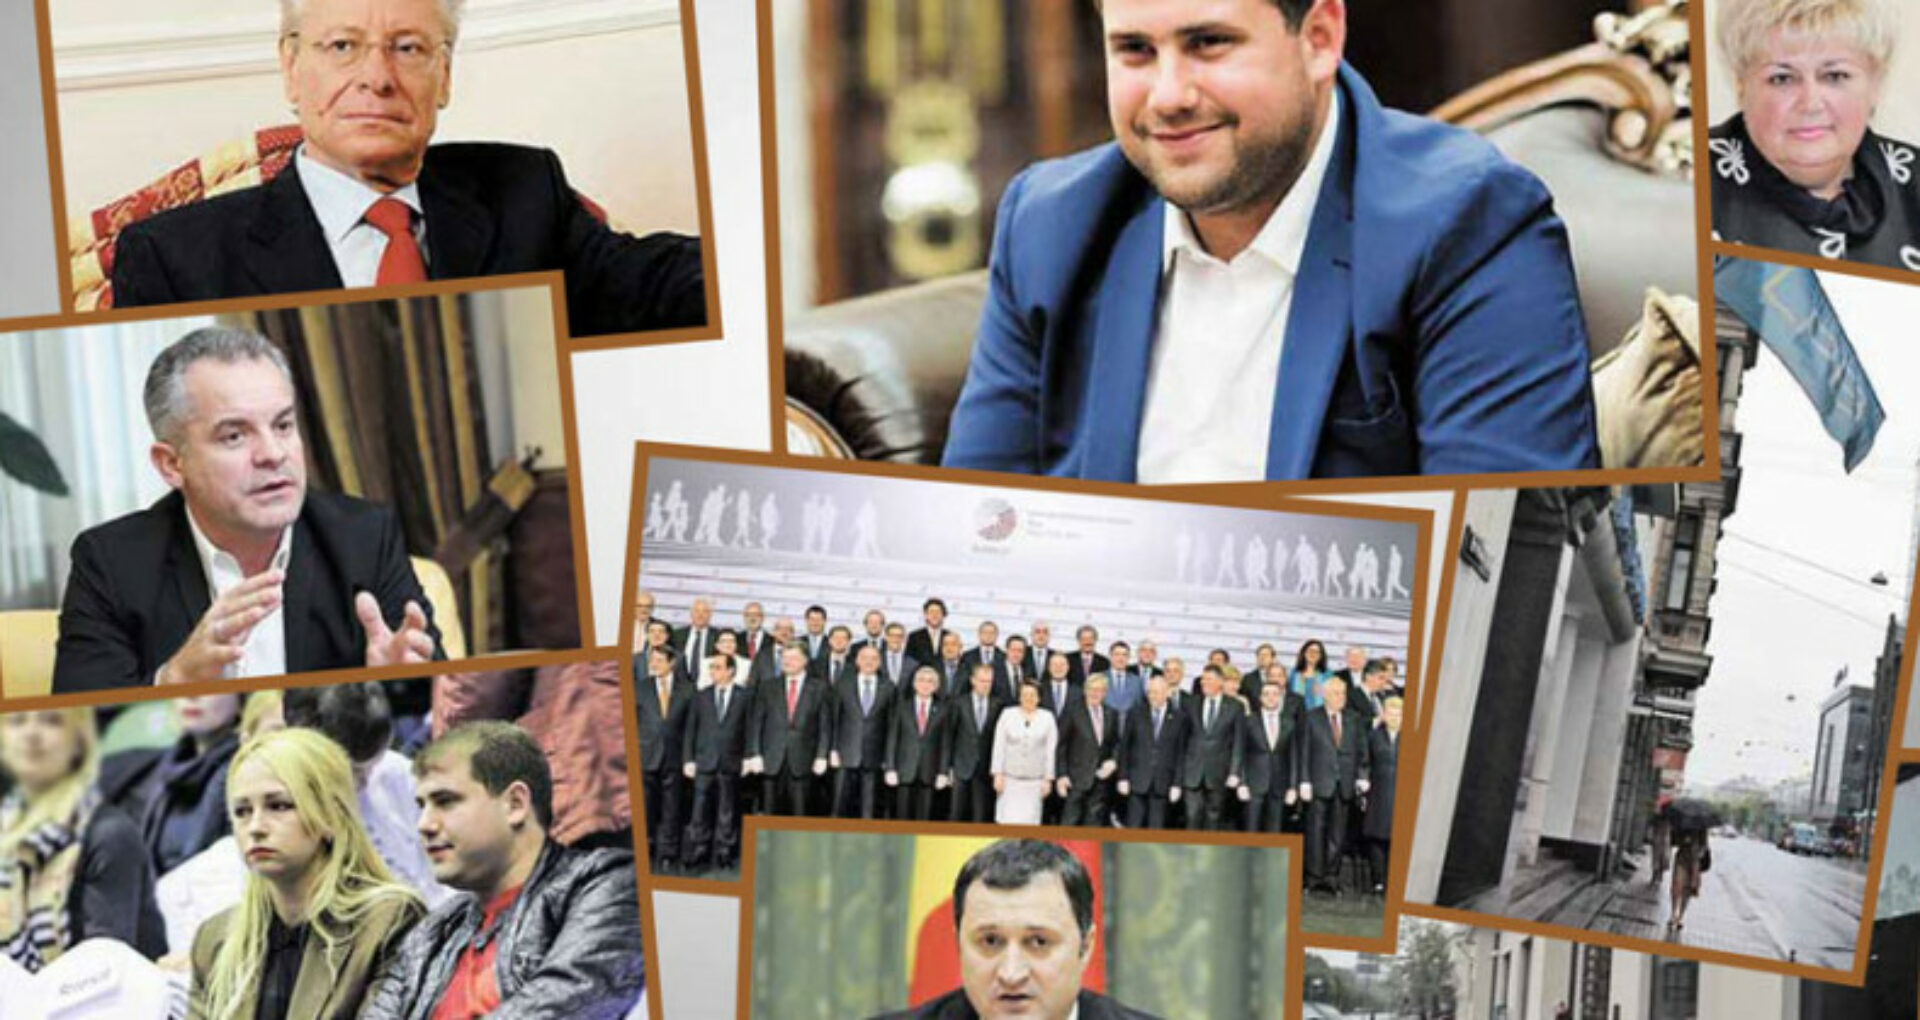 Fugitive Oligarch Wanted in Moldova’s “Theft of the Century” Case